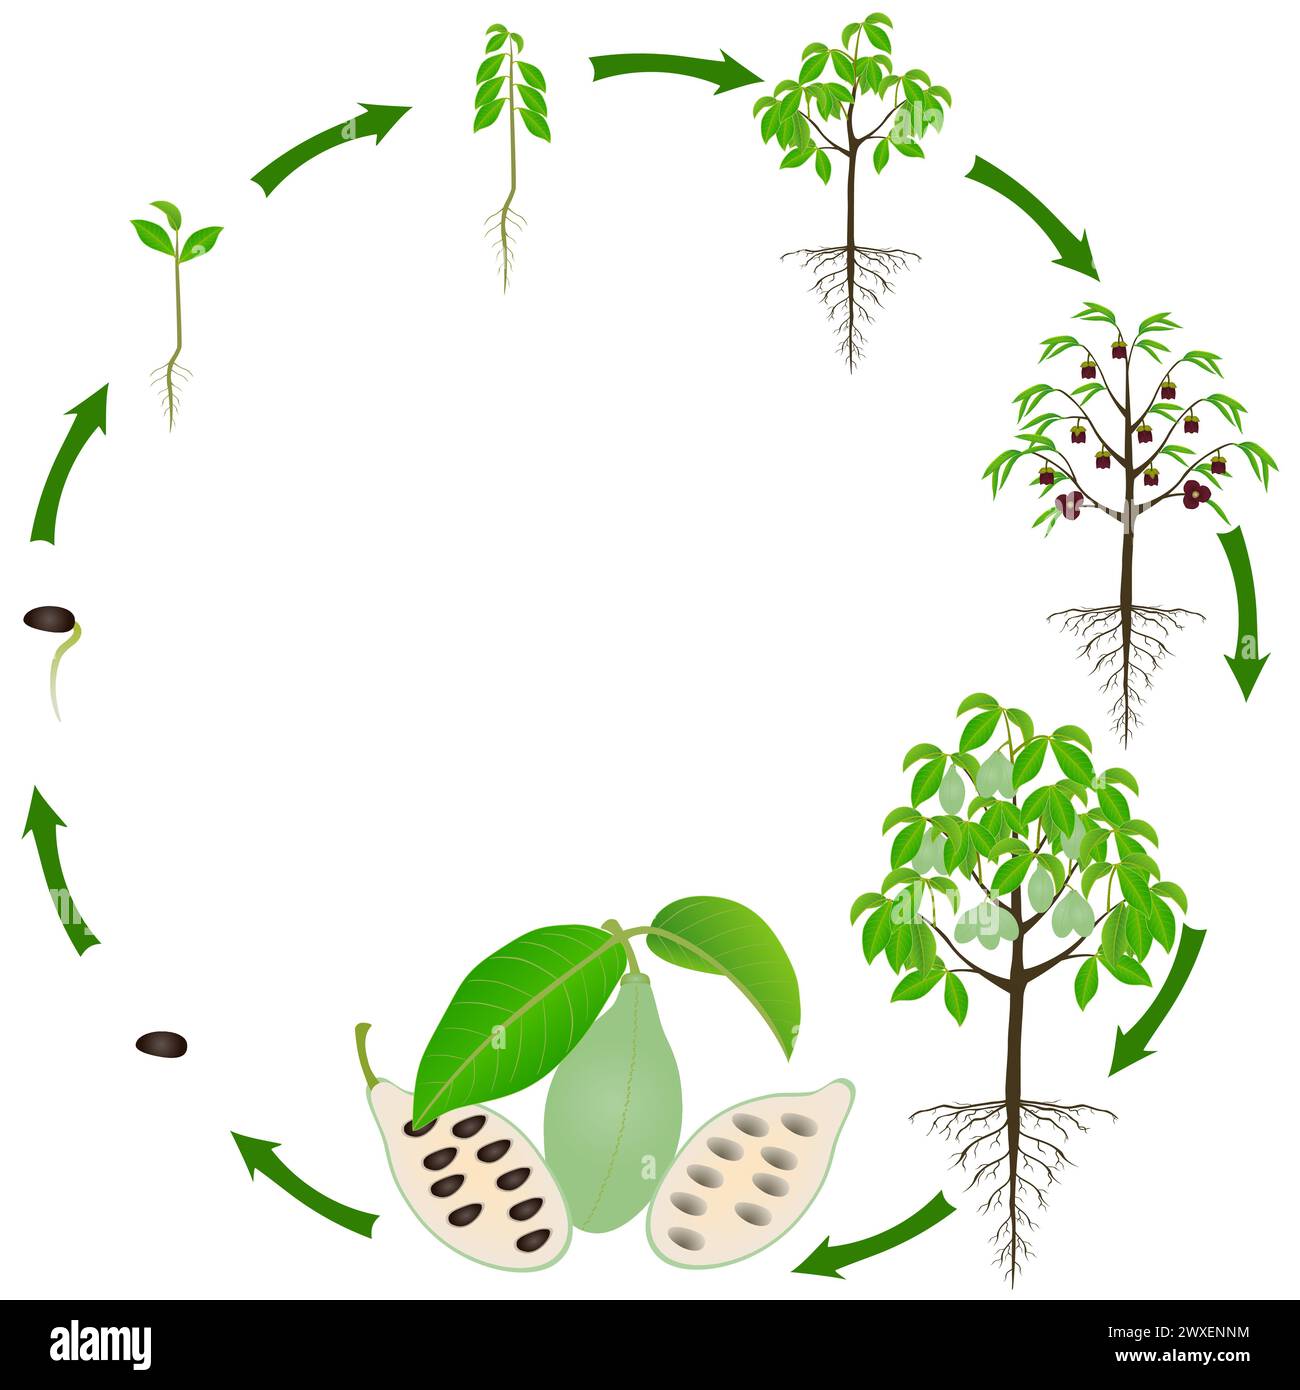 Life cycle of  asimina triloba the pawpaw plant on a white background. Stock Vector